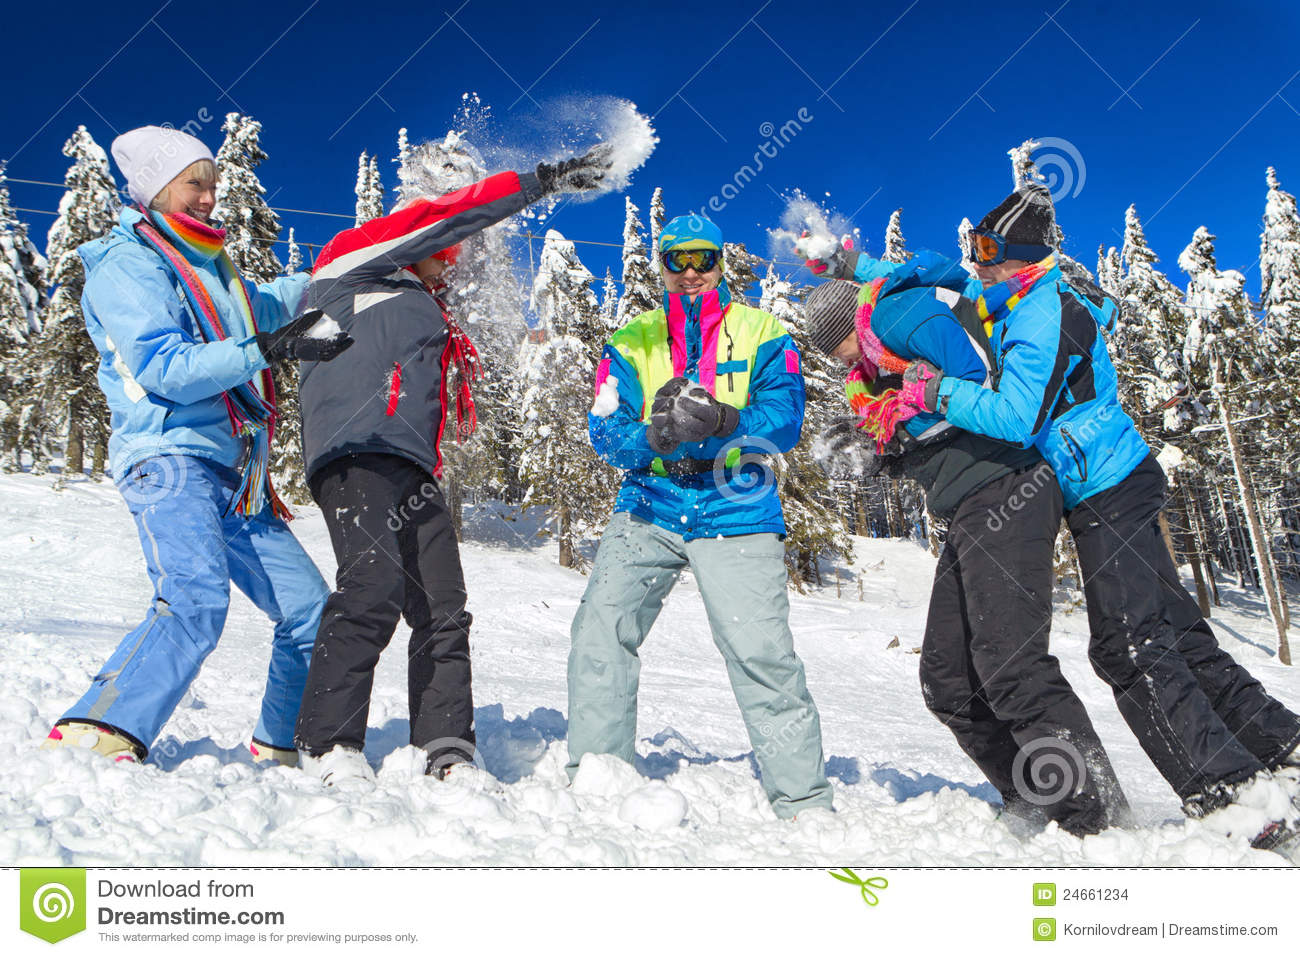 Yuong People Having Snowball Fight In Snow In Winter Background